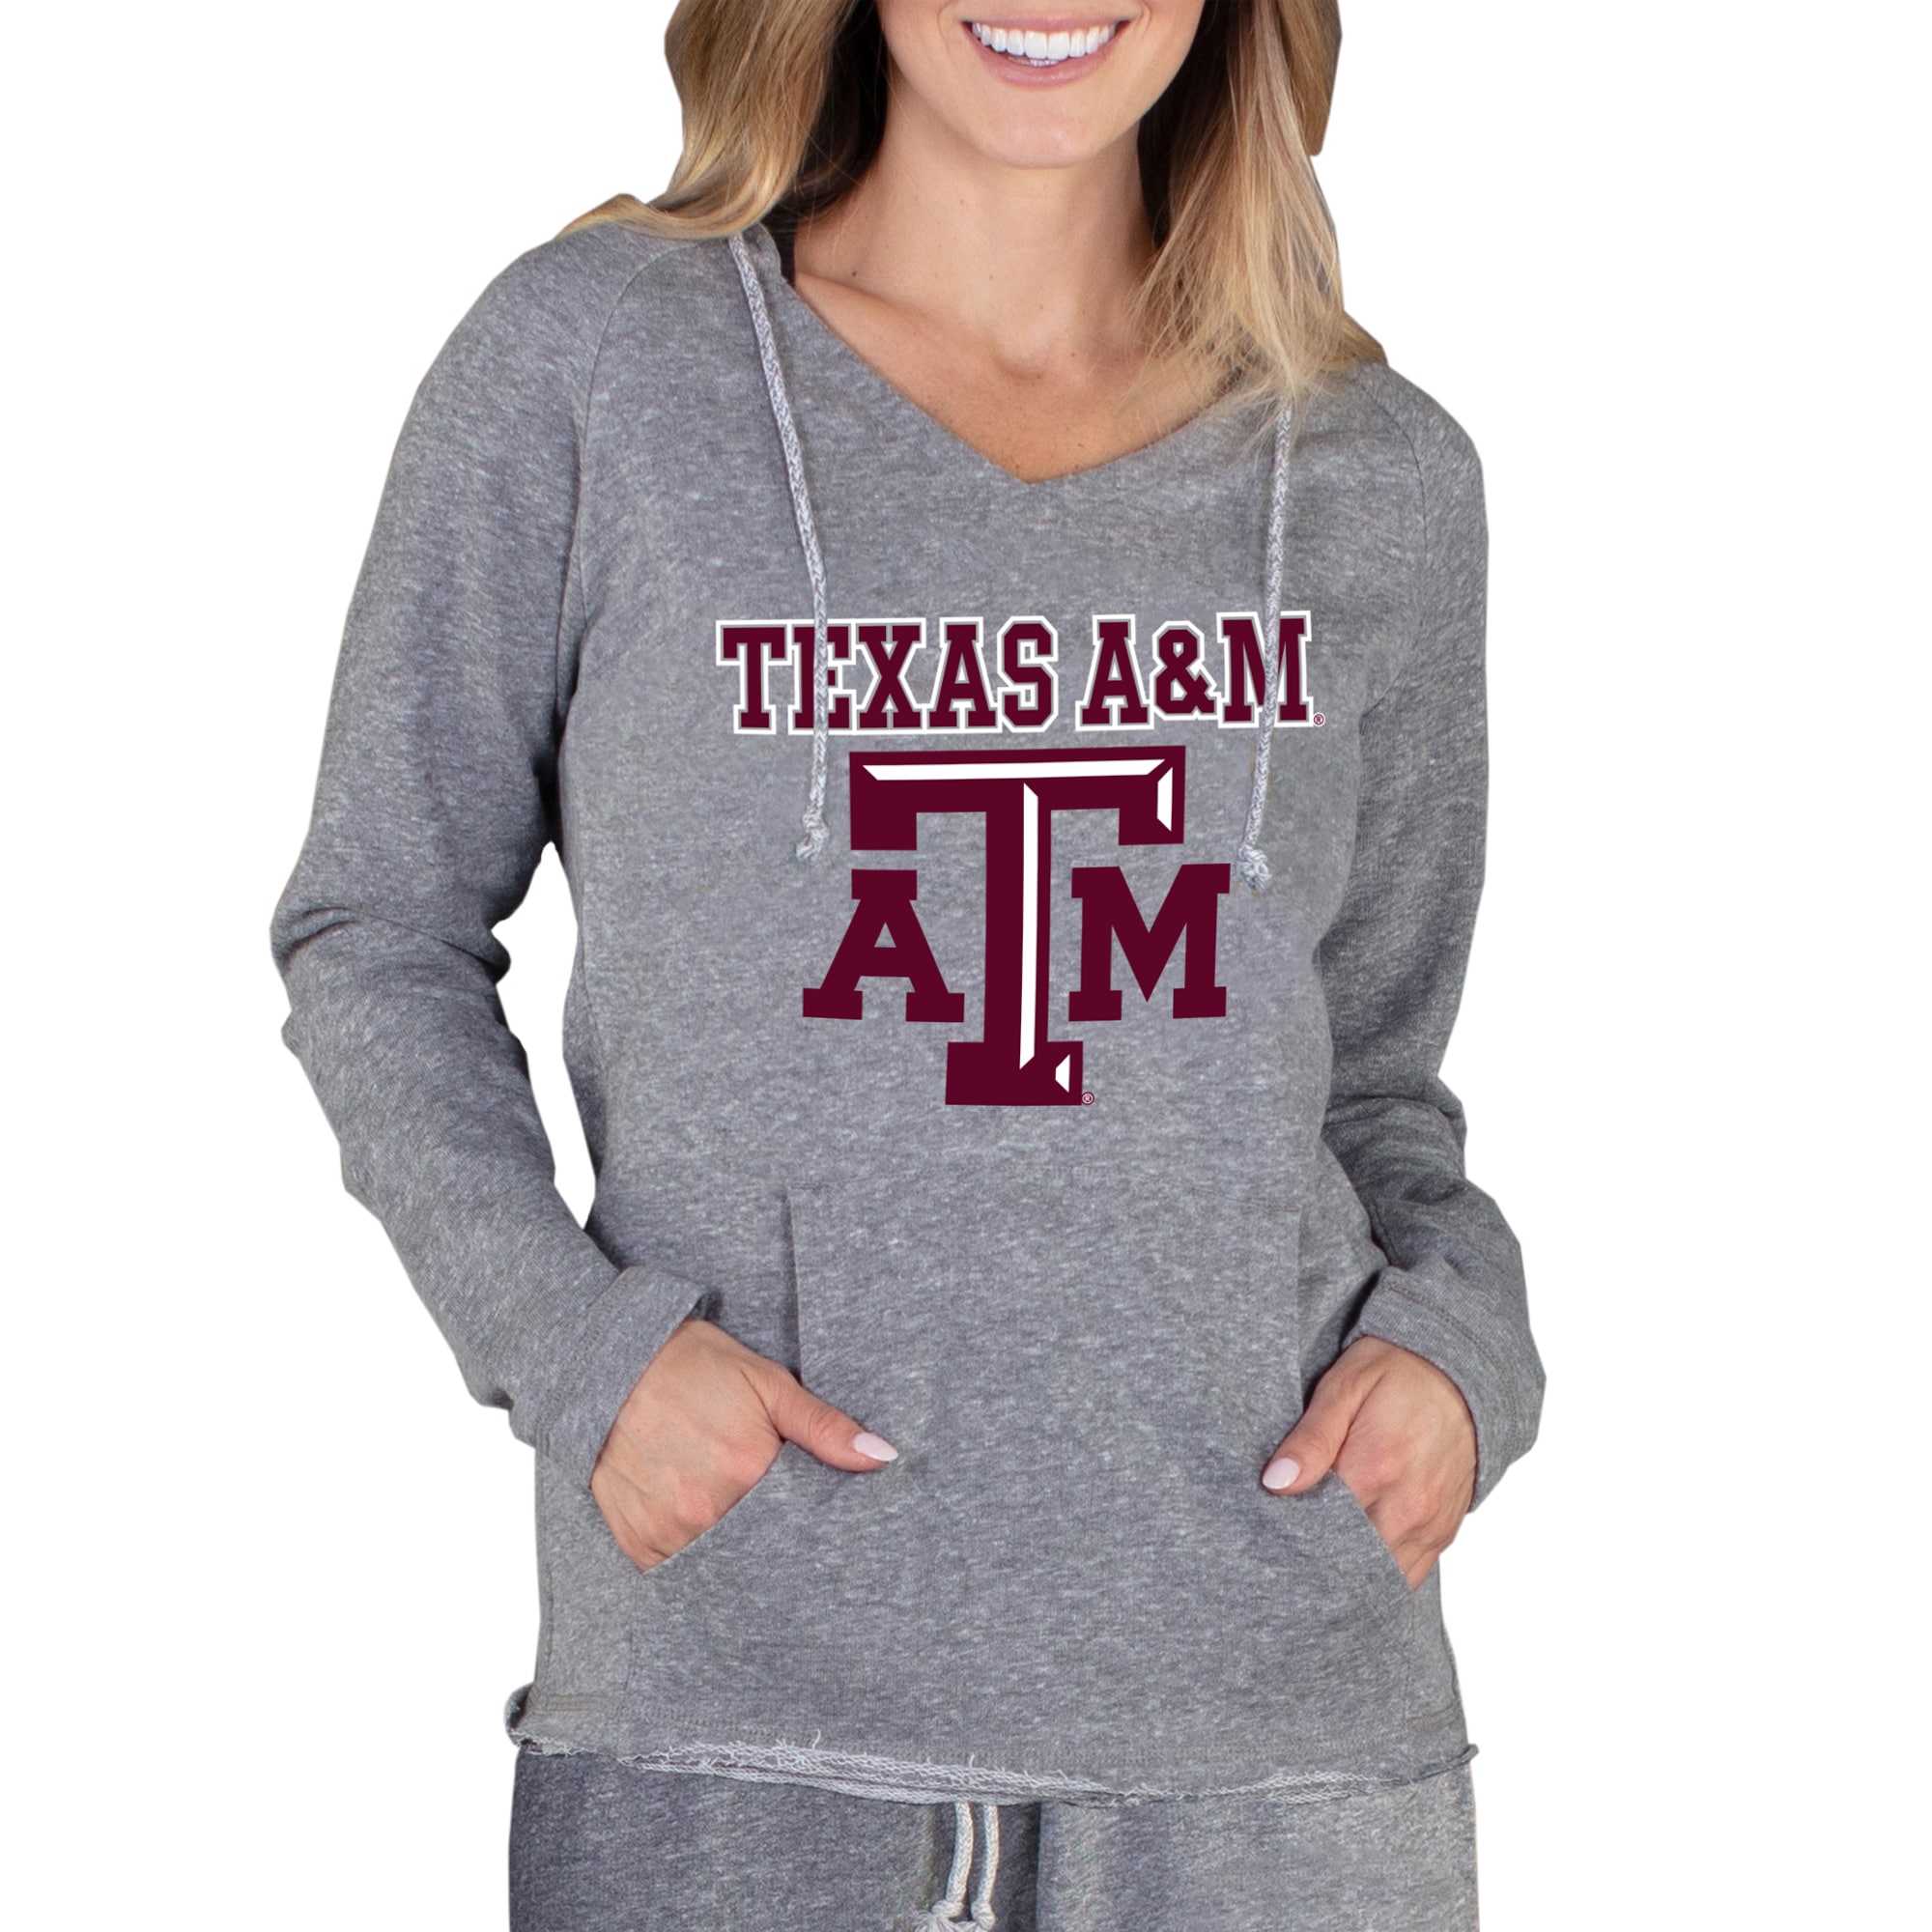 Women's Concepts Sport Gray Texas A&M Aggies Mainstream Lightweight Terry Pullover Hoodie - image 1 of 1